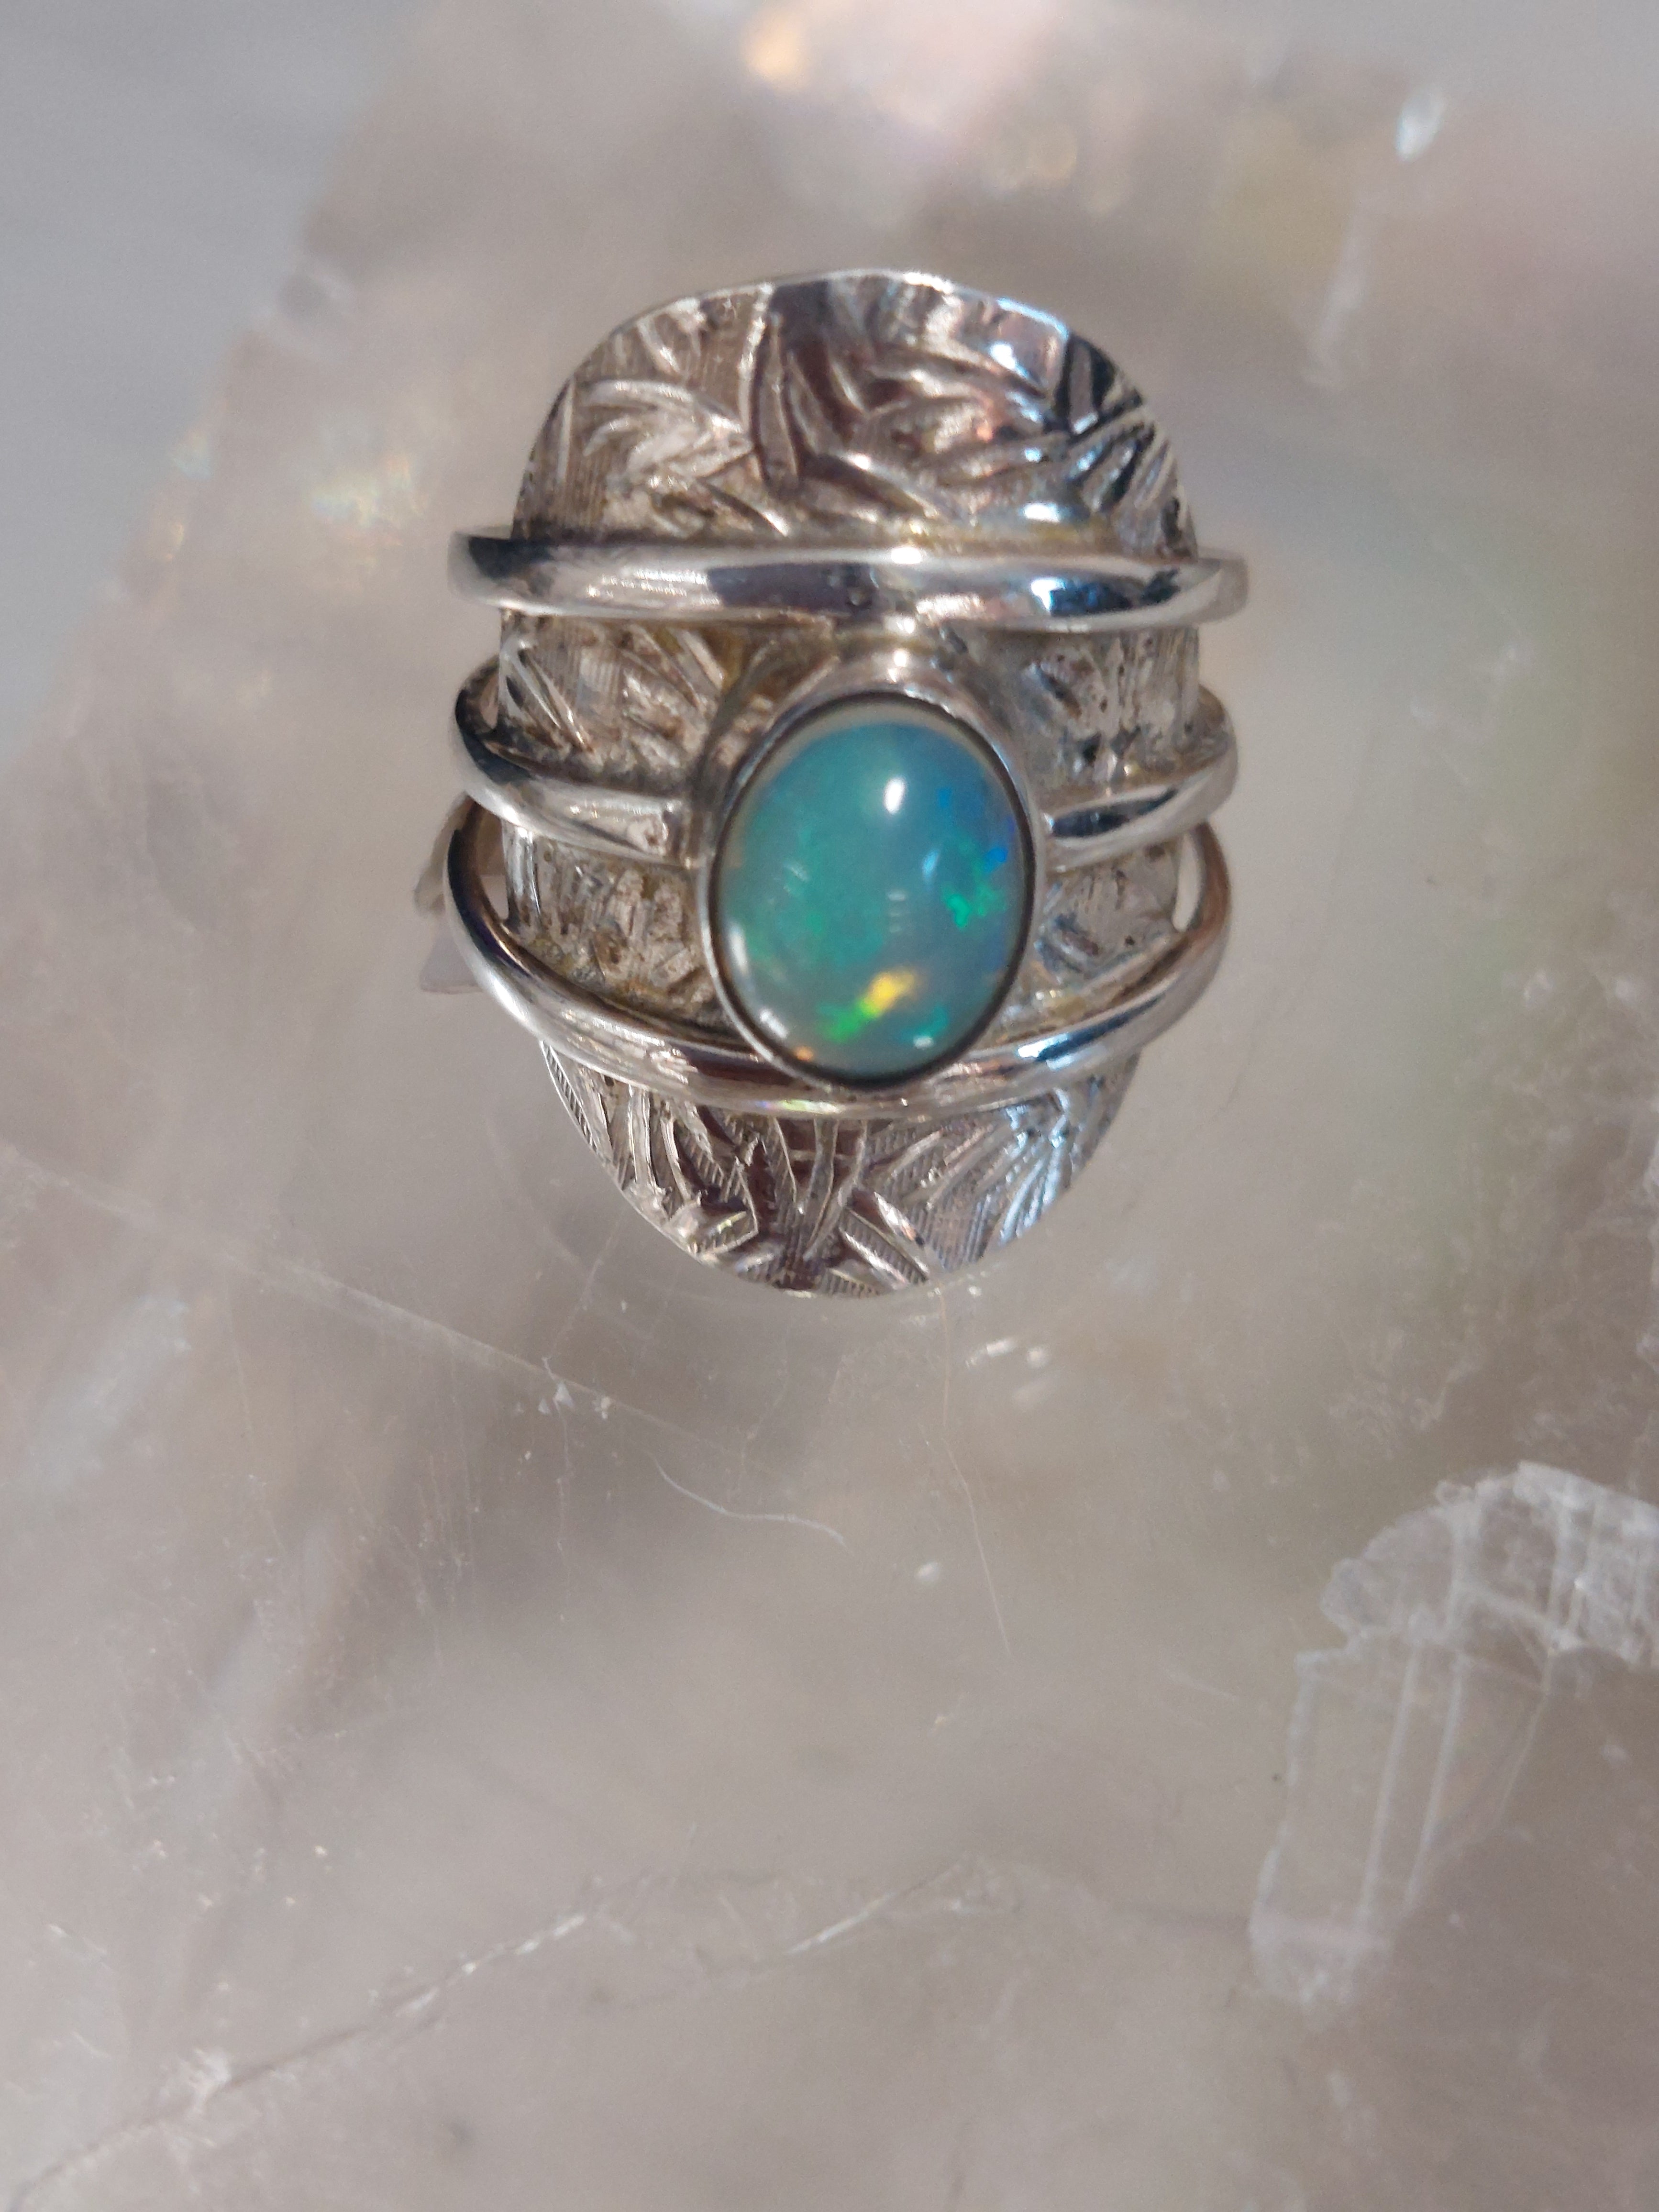 Opal Oval Engraved Silver Ring - Size 6 - 925 Sterling Silver